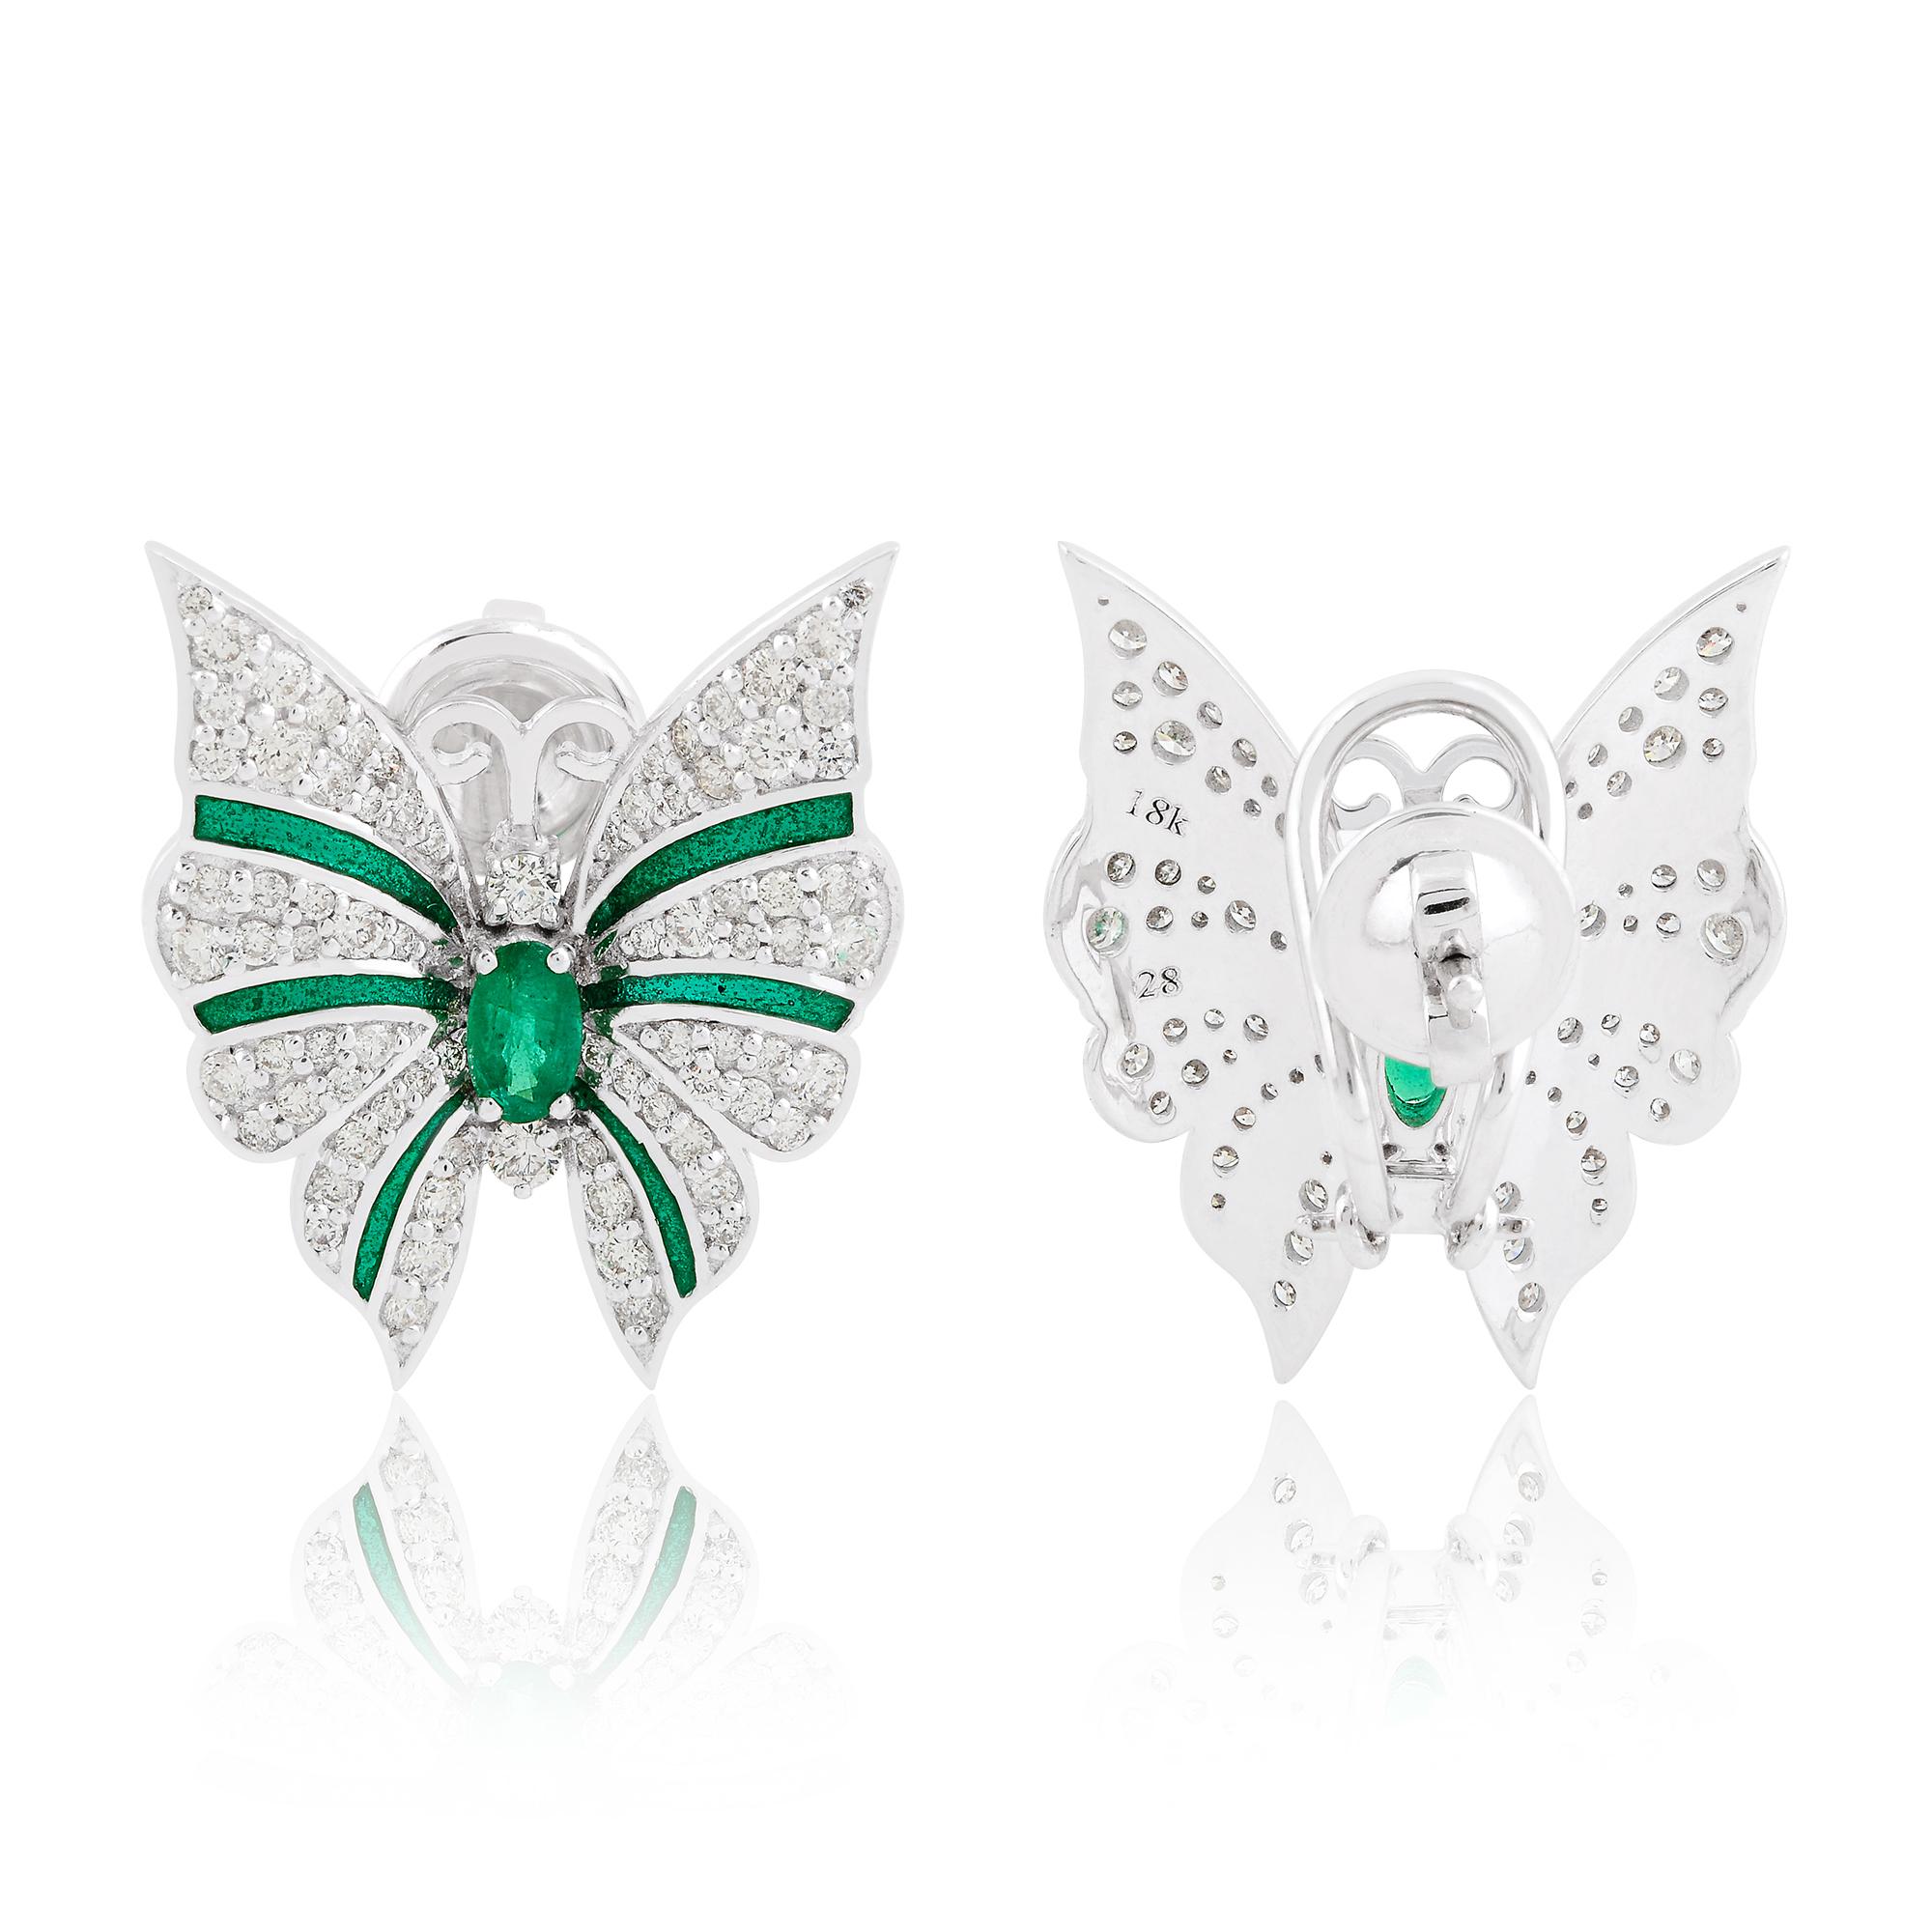 Item Code :- SEE-1226A (14k)
Gross Wt :- 8.14 gm
Solid 14k White Gold Wt :- 7.76 gm
Natural Diamond Wt :- 1.30 ct. ( AVERAGE DIAMOND CLARITY SI1-SI2 & COLOR H-I )
Natural Emerald Wt :- 0.55 ct.
Earrings Size :- 25 x 22 mm approx.

✦